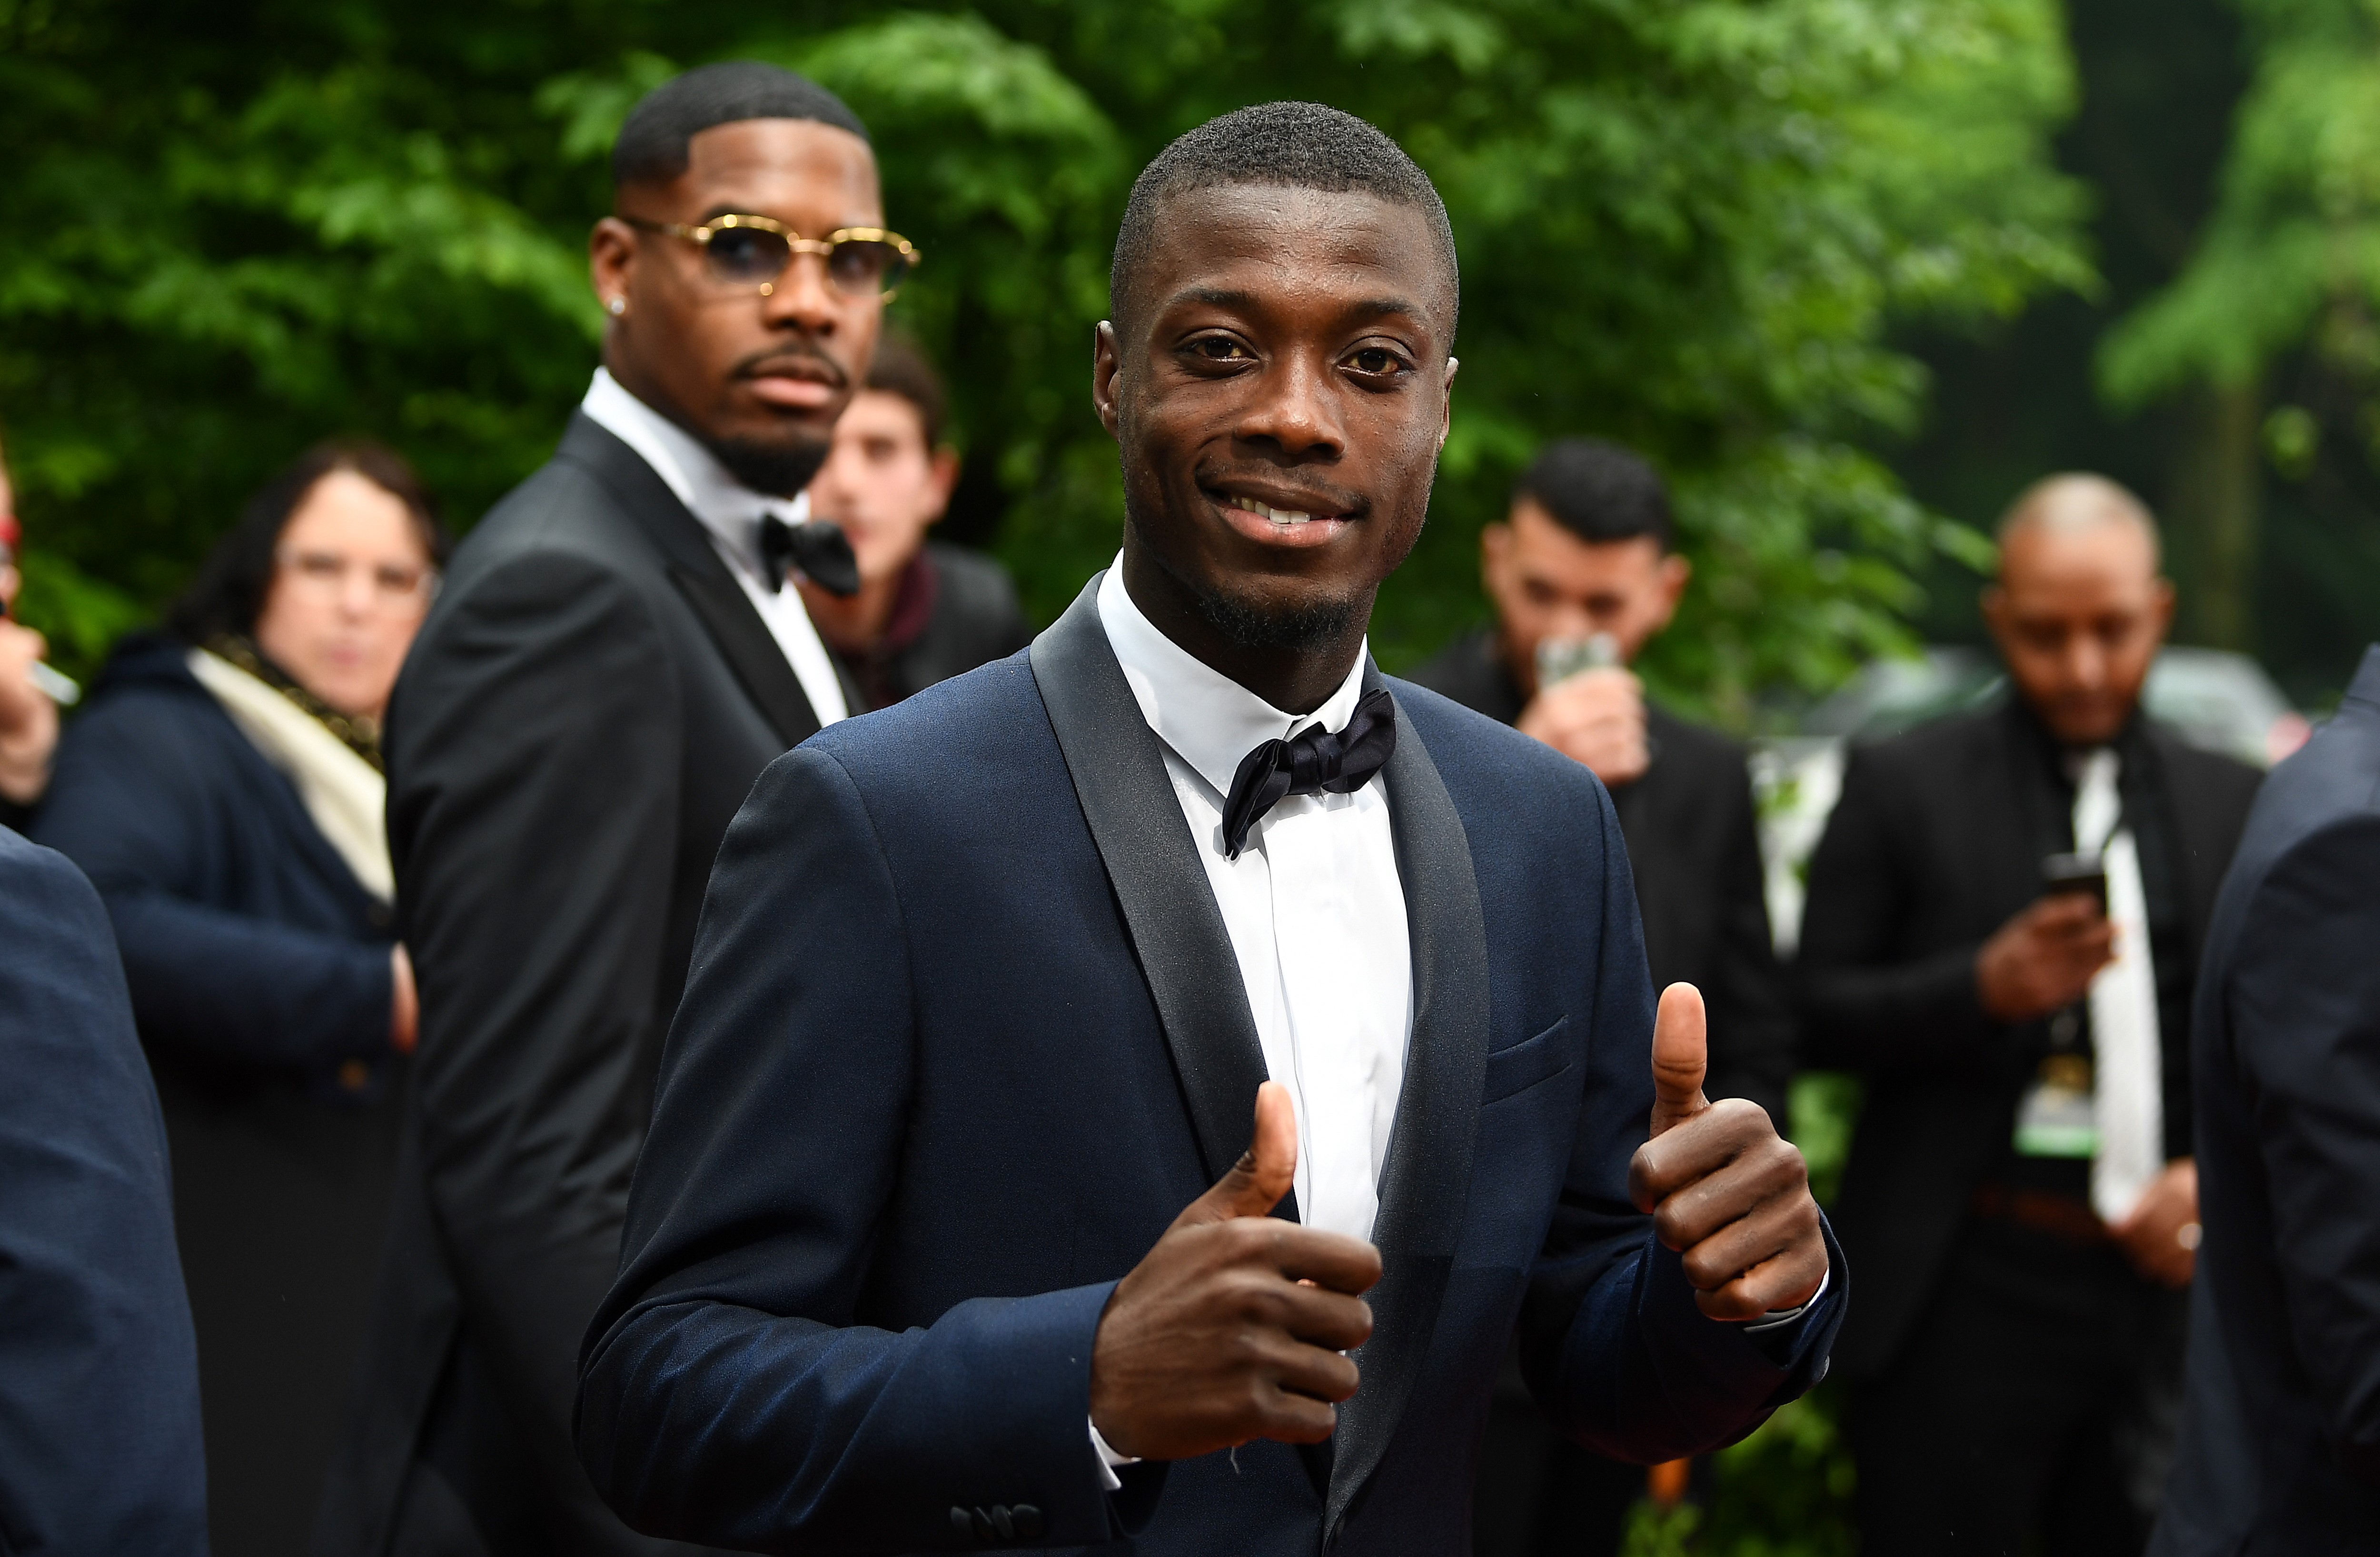 Lille forward Nicolas Pepe arrives to take part in a TV show on May 19, 2019 in Paris, as part of the 28th edition of the UNFP (French National Professional Football players Union) trophy ceremony. (Photo by FRANCK FIFE / AFP)        (Photo credit should read FRANCK FIFE/AFP/Getty Images)